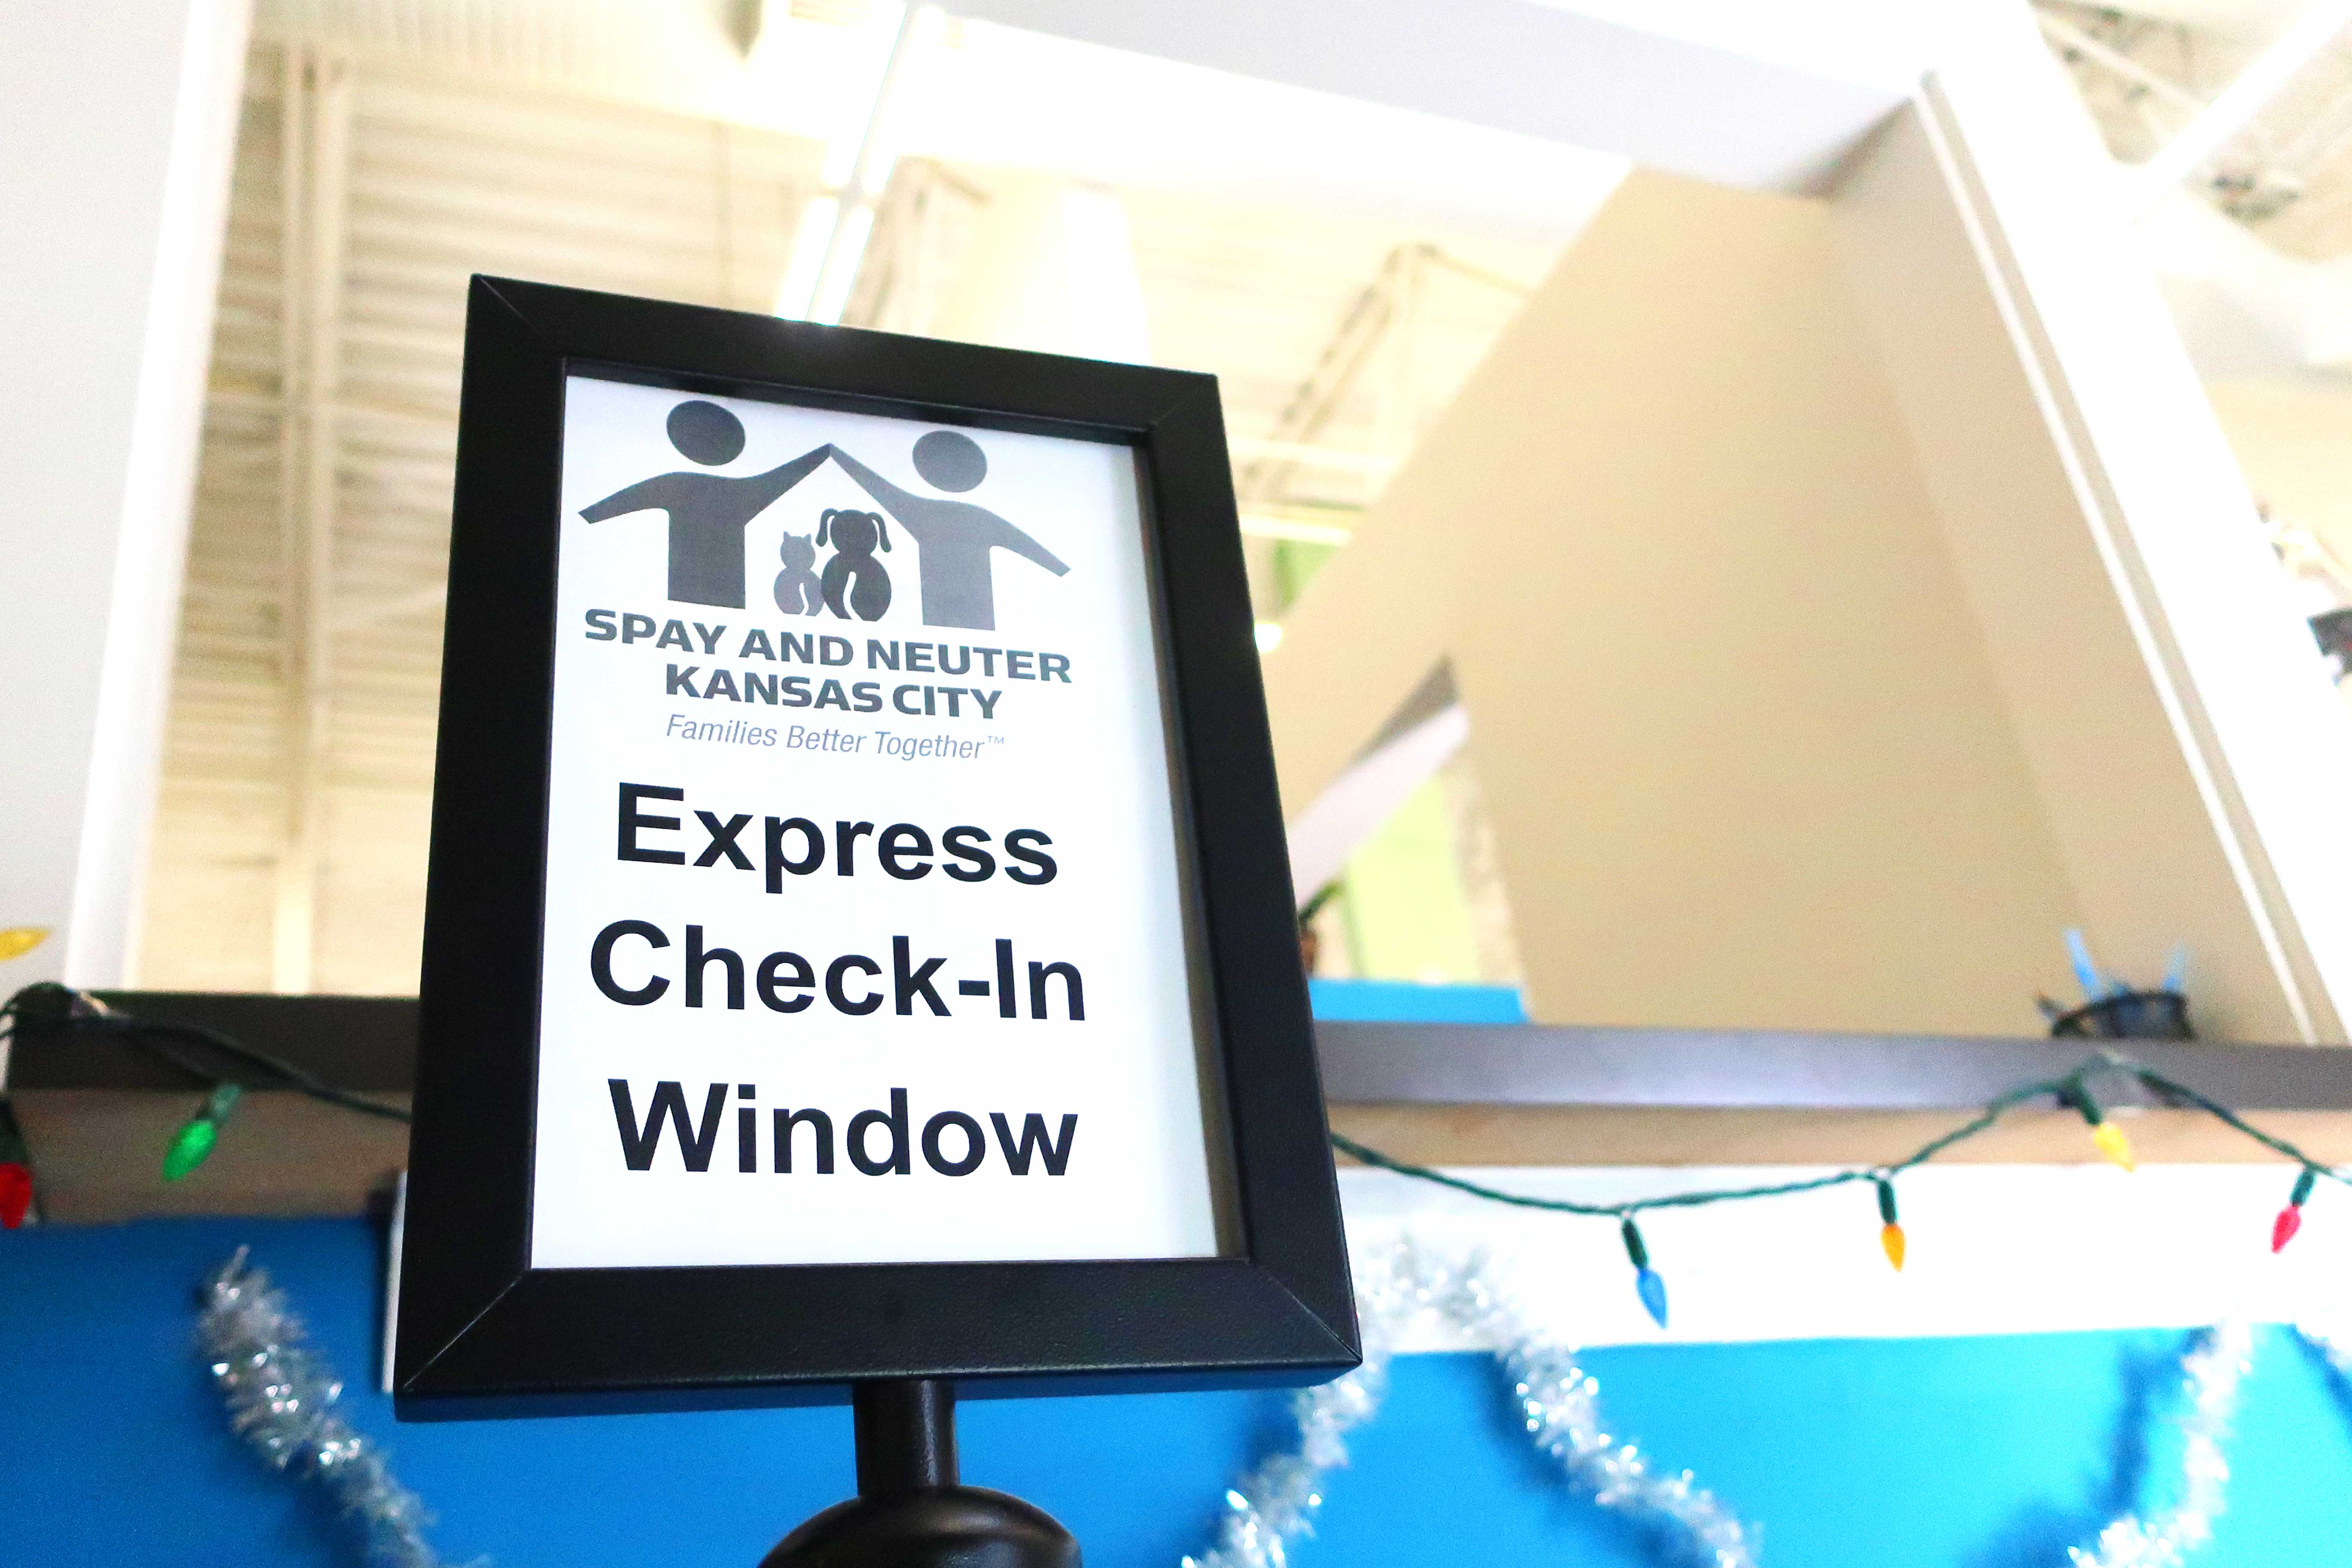 A sign for an express check-in window